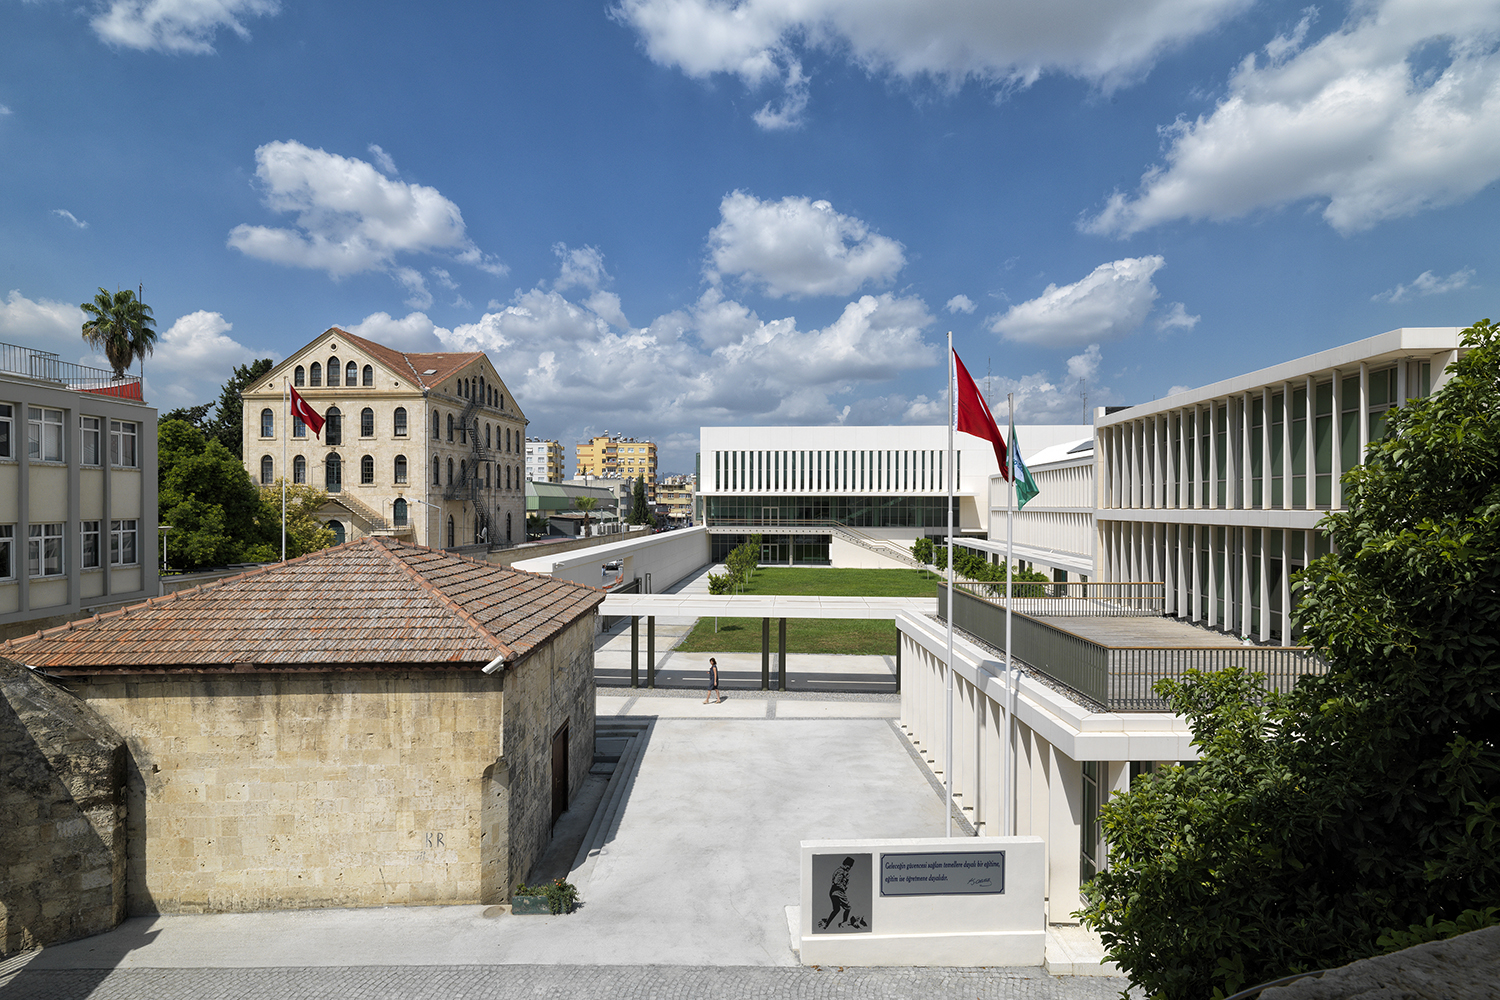 General view of the campus: old and new